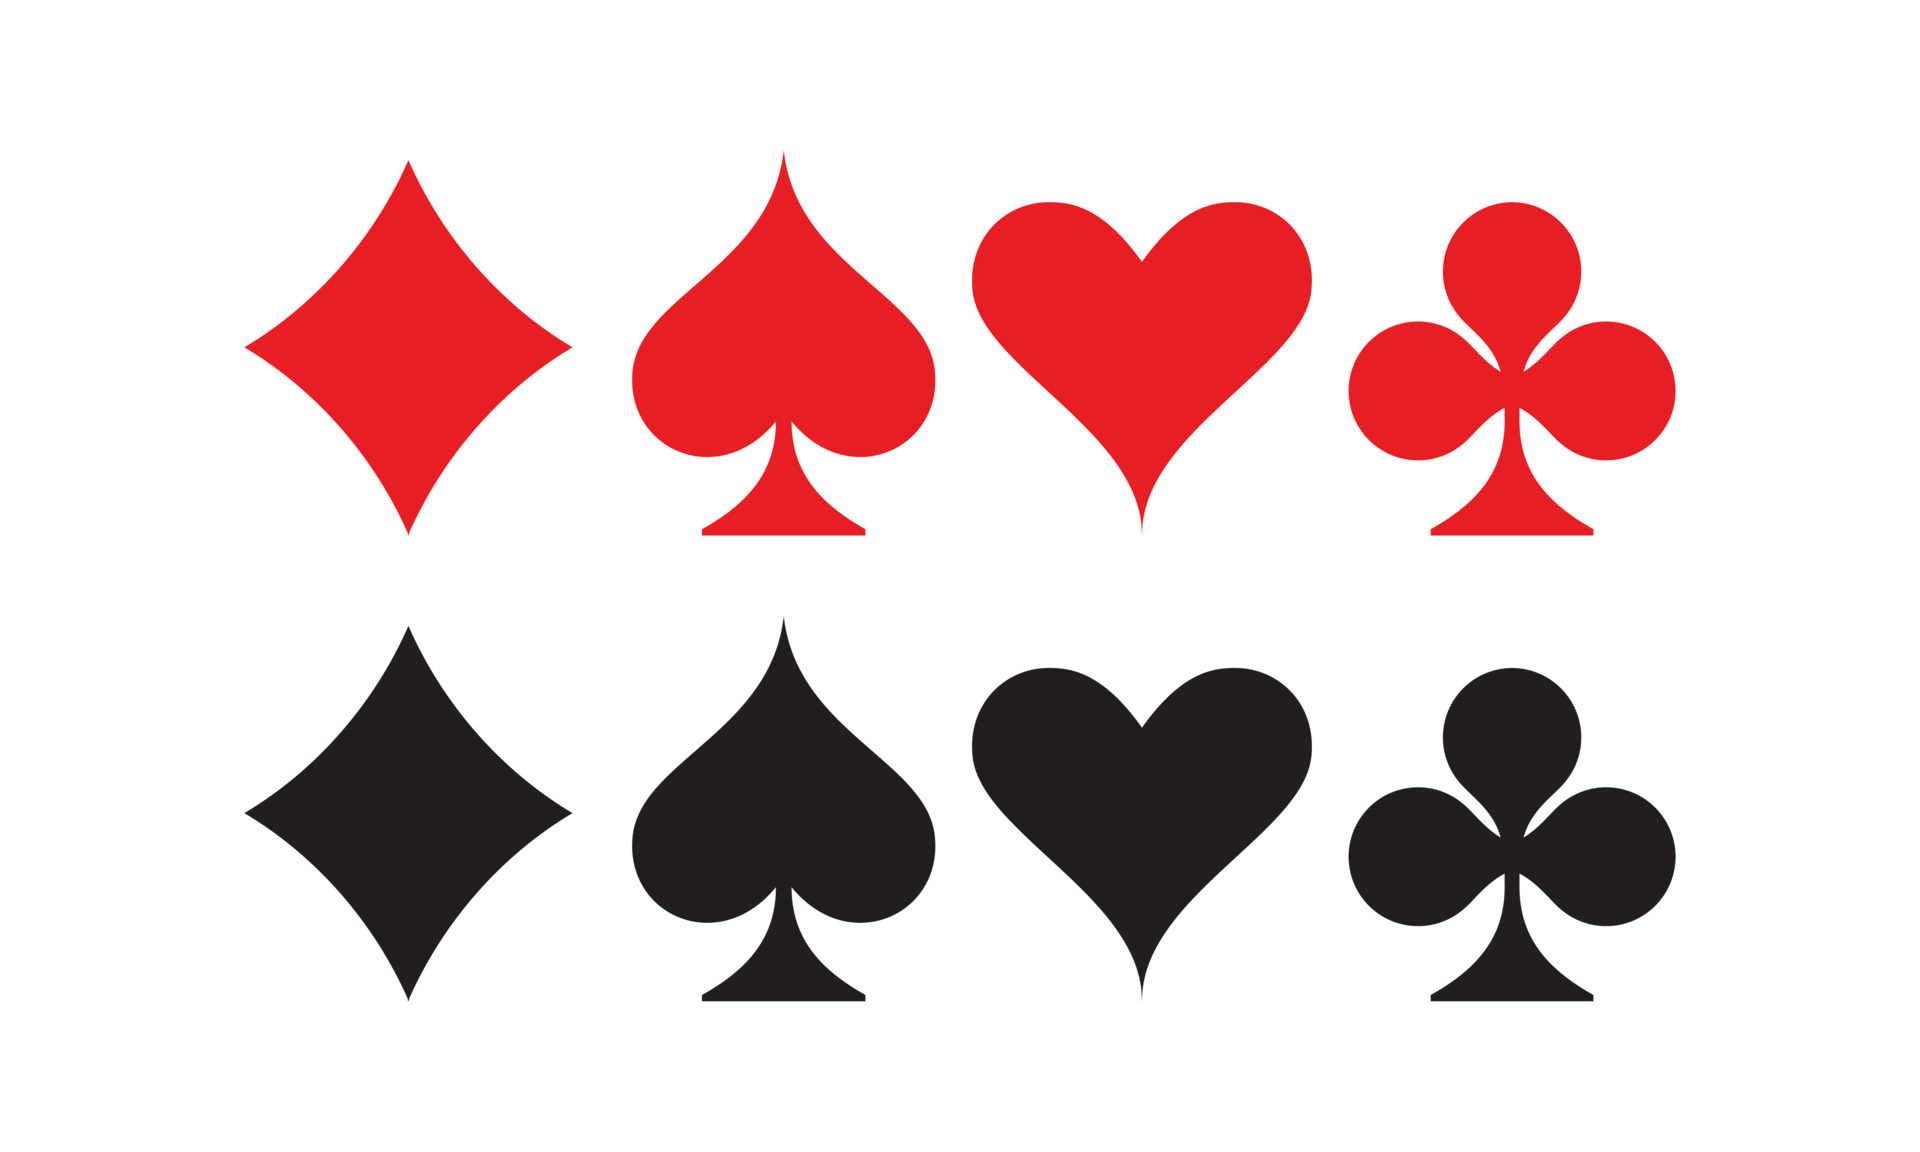 Flat vector illustration of playing card symbol set. Suitable for design  element of playing card game. Symbol of diamond, spade, heart, and club  icon in black and red. 4615597 Vector Art at